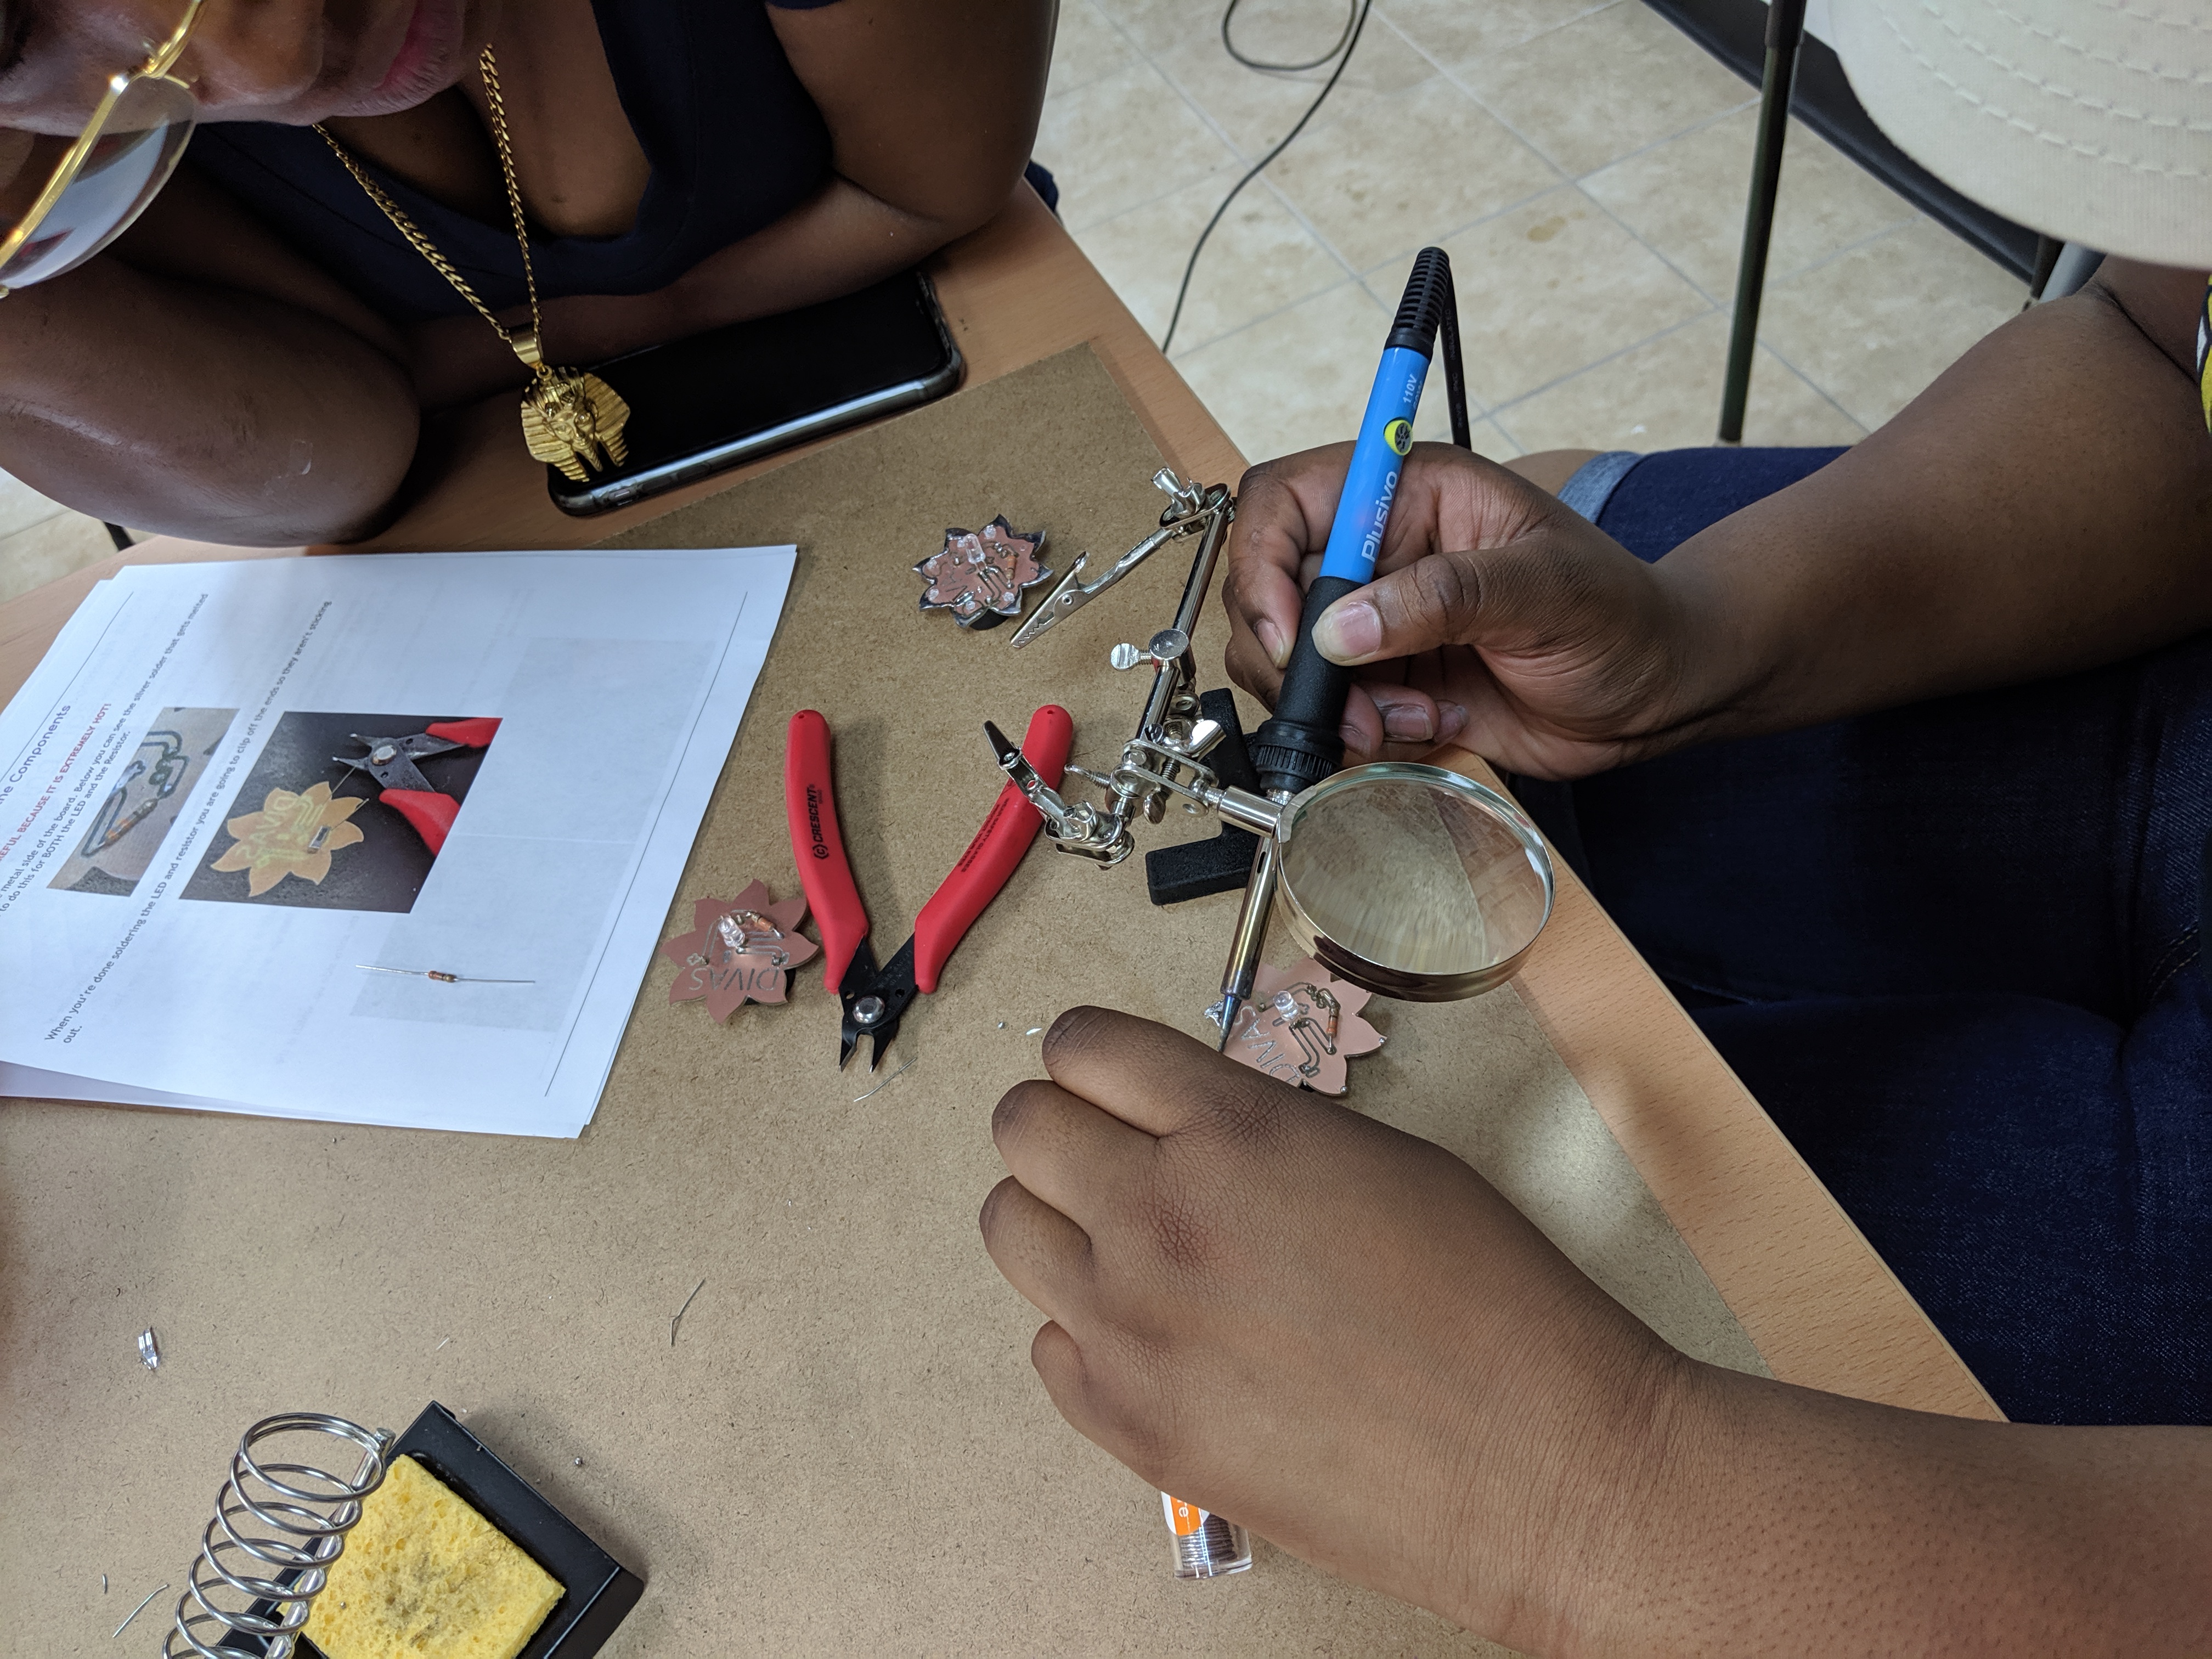 person soldering an LED circuit board with the DIVAs logo